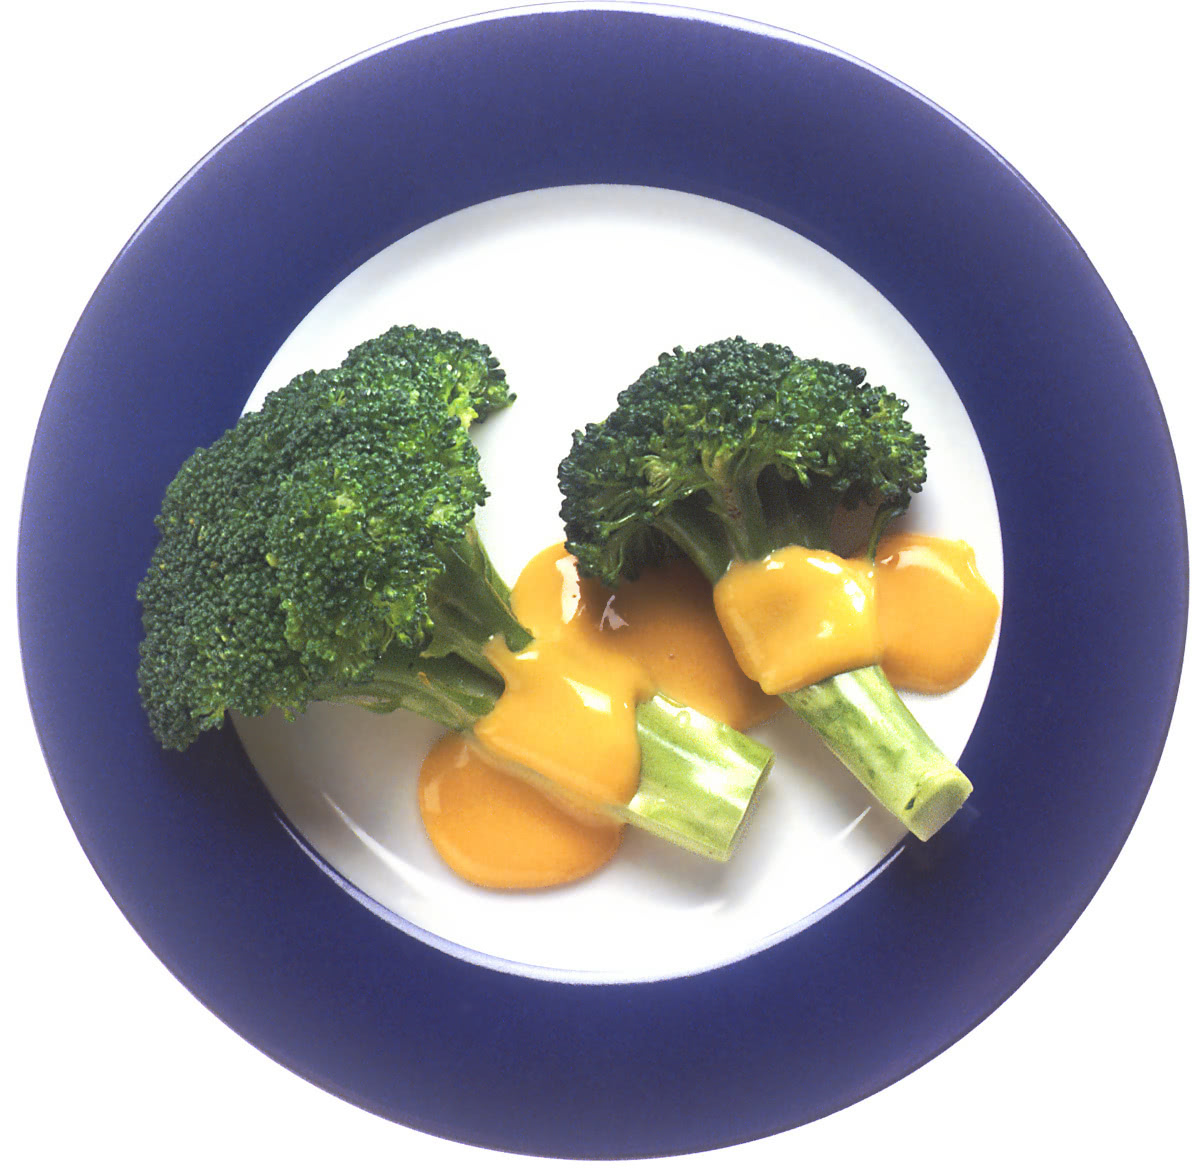 Broccoli and cheese large